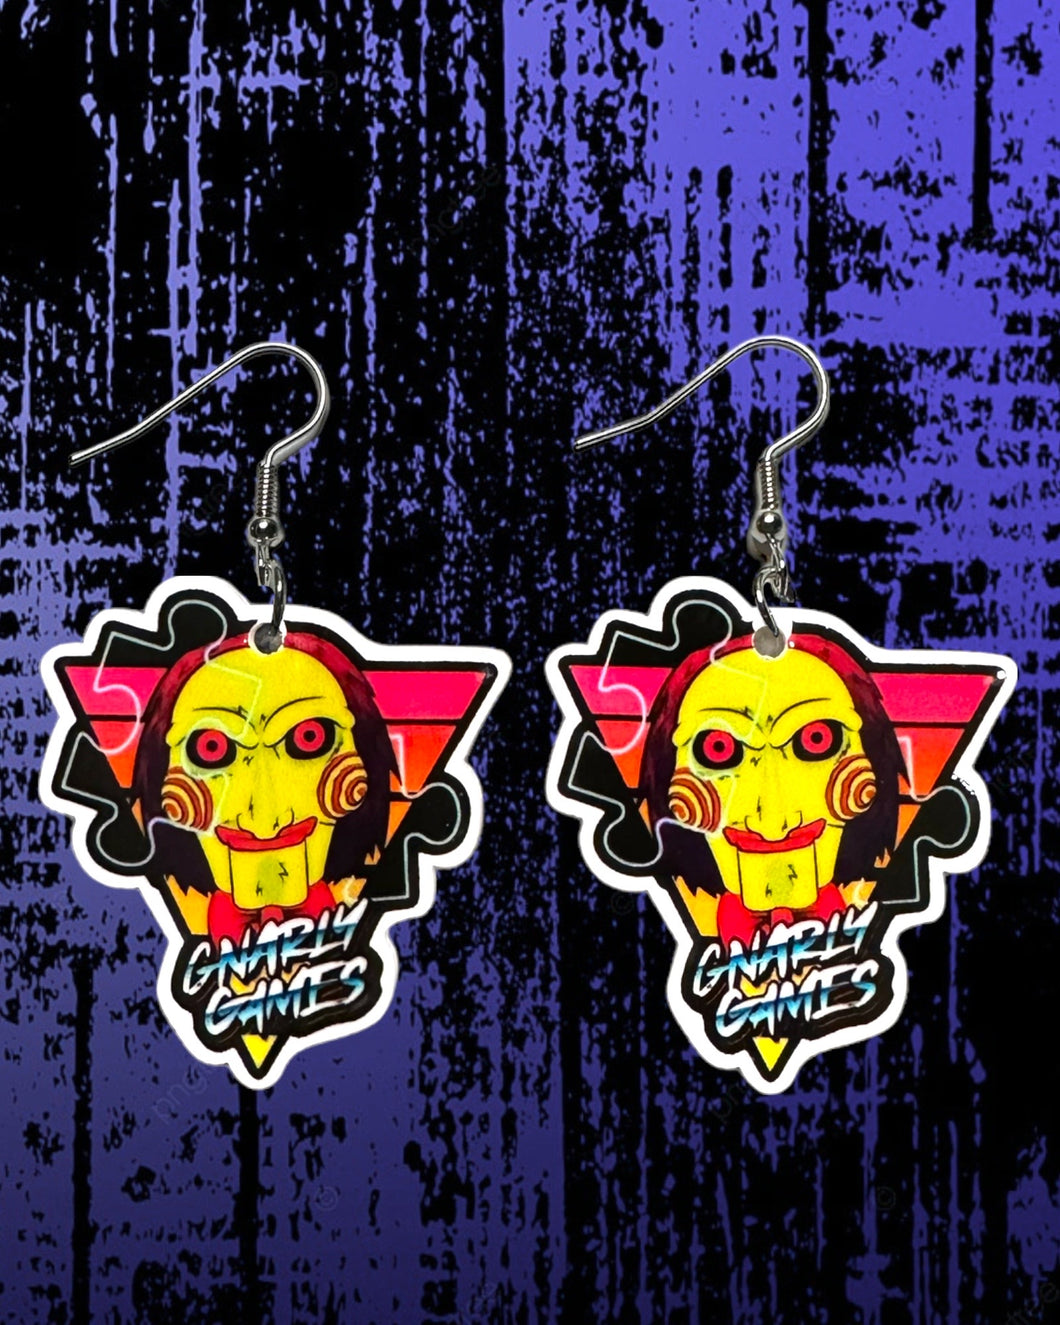 Gnarly Games Earrings